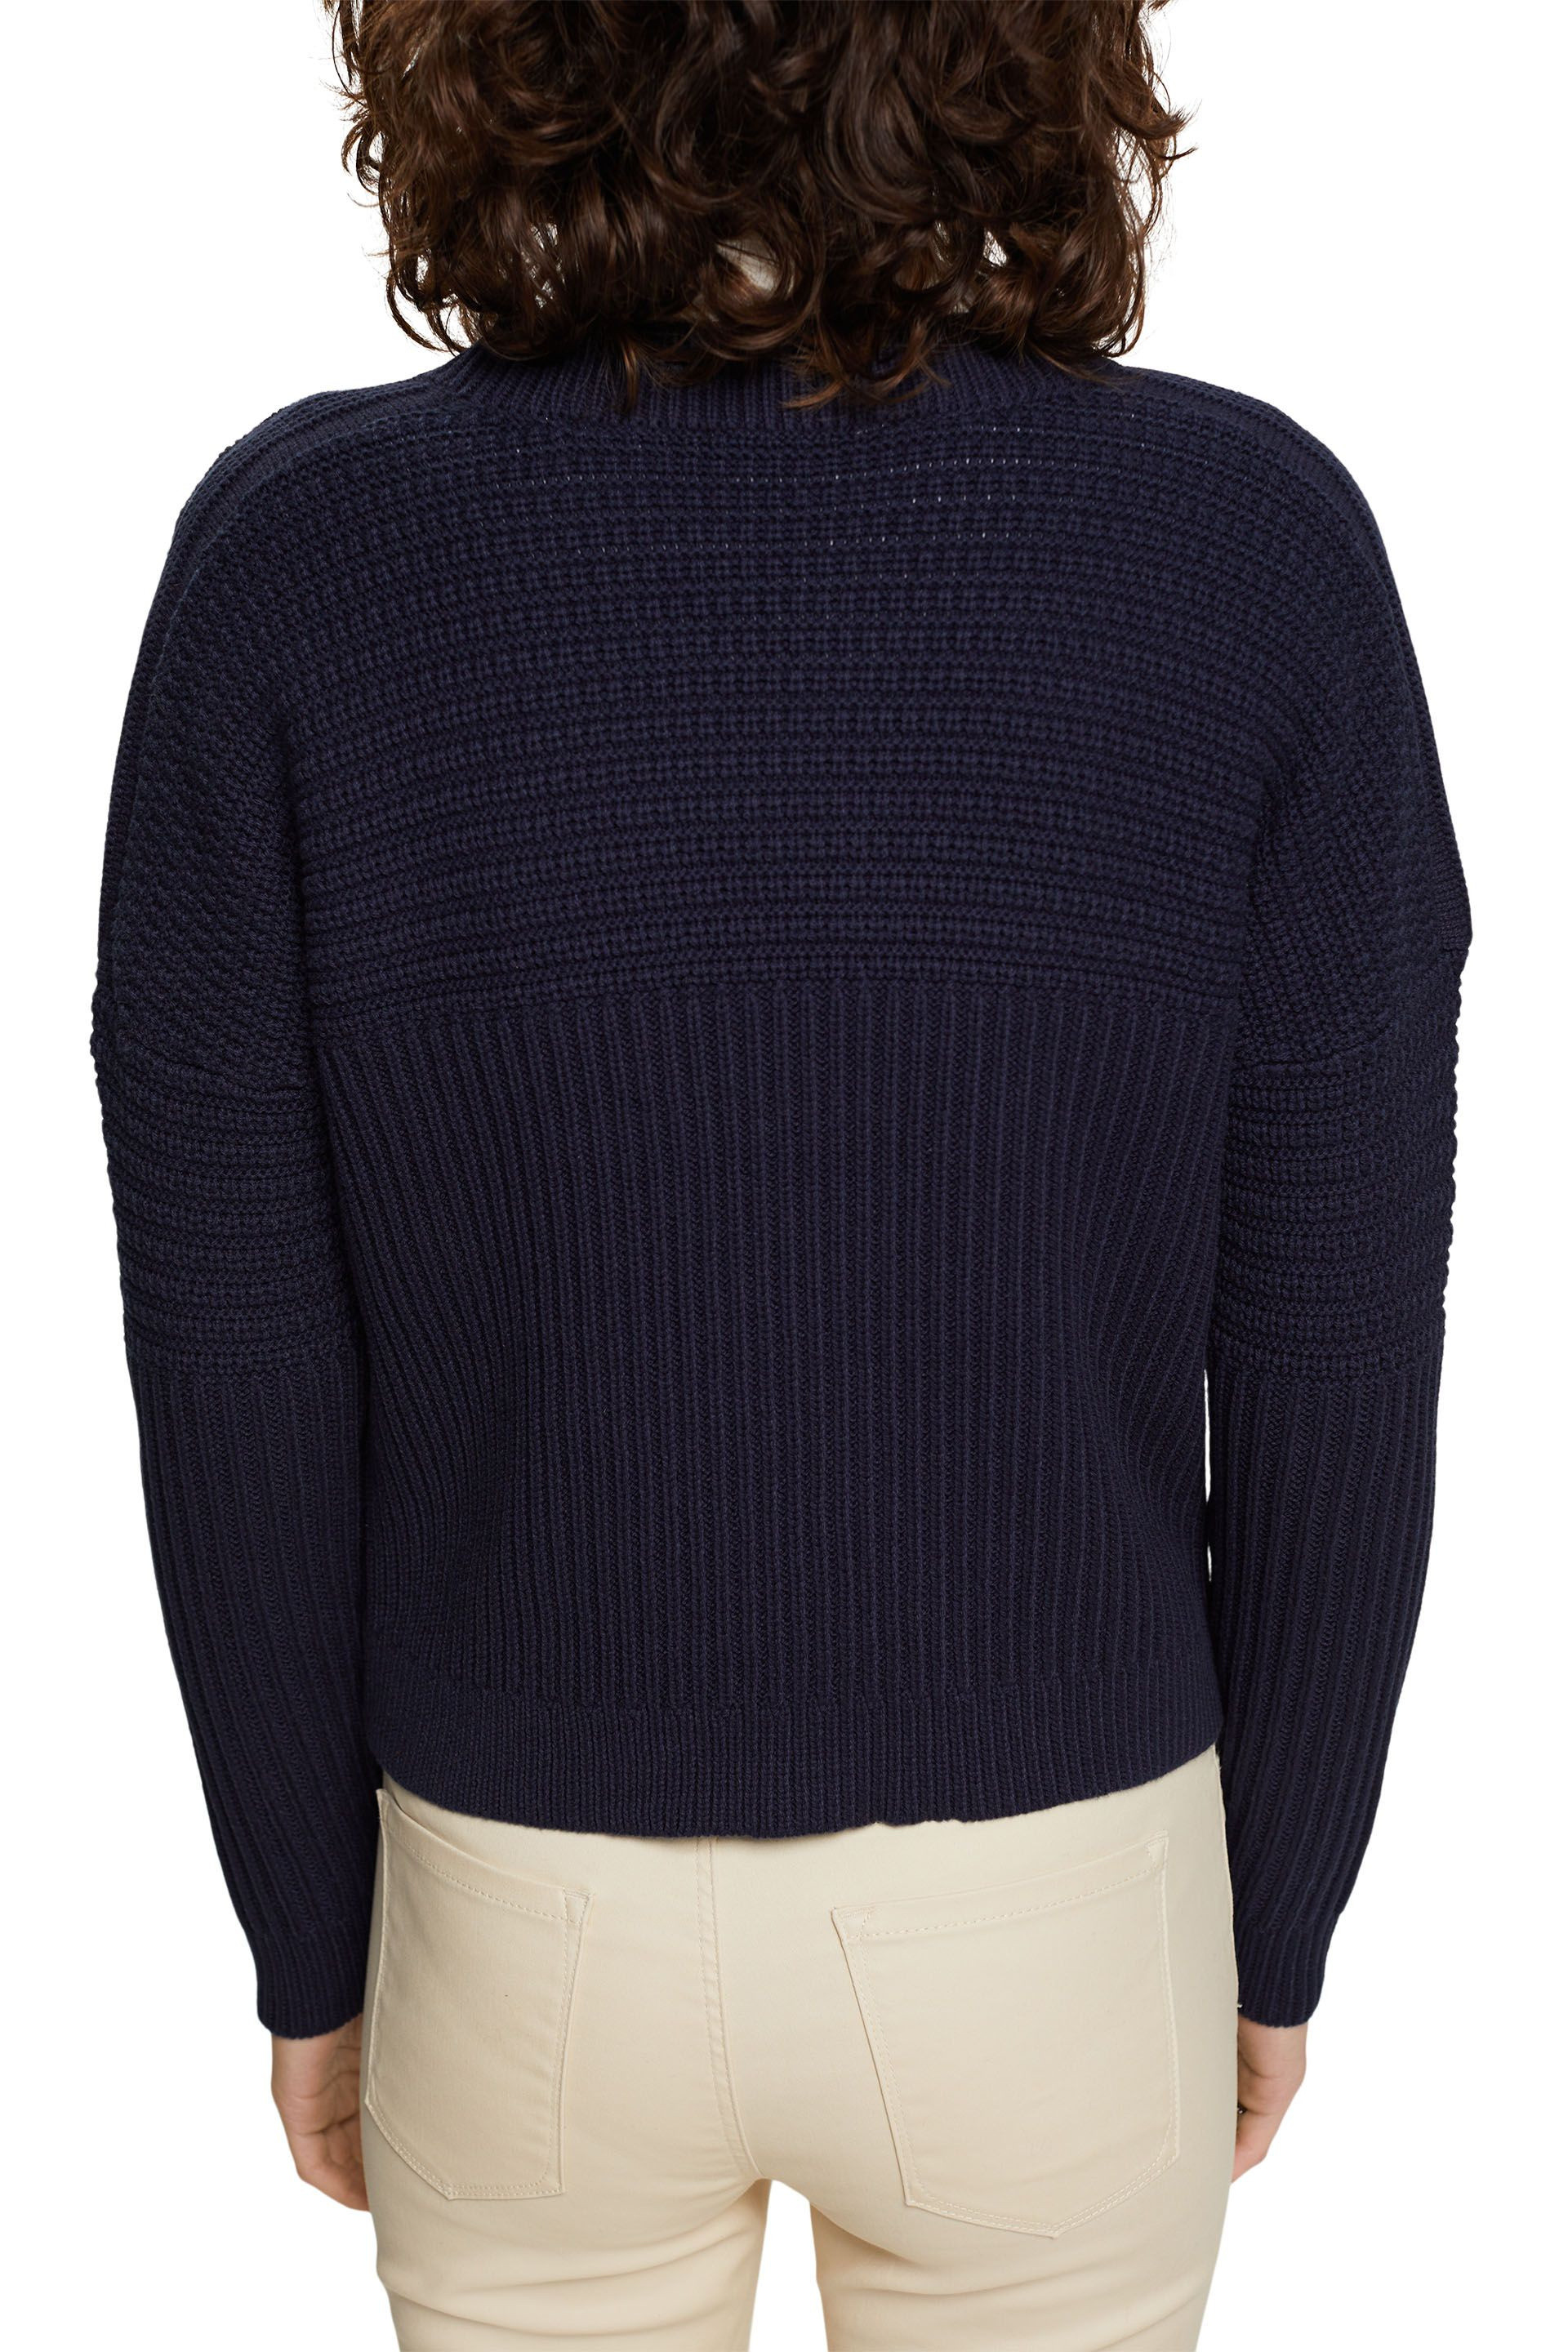 Esprit - Chunky knit pullover in cotton blend, Dark Blue, large image number 2